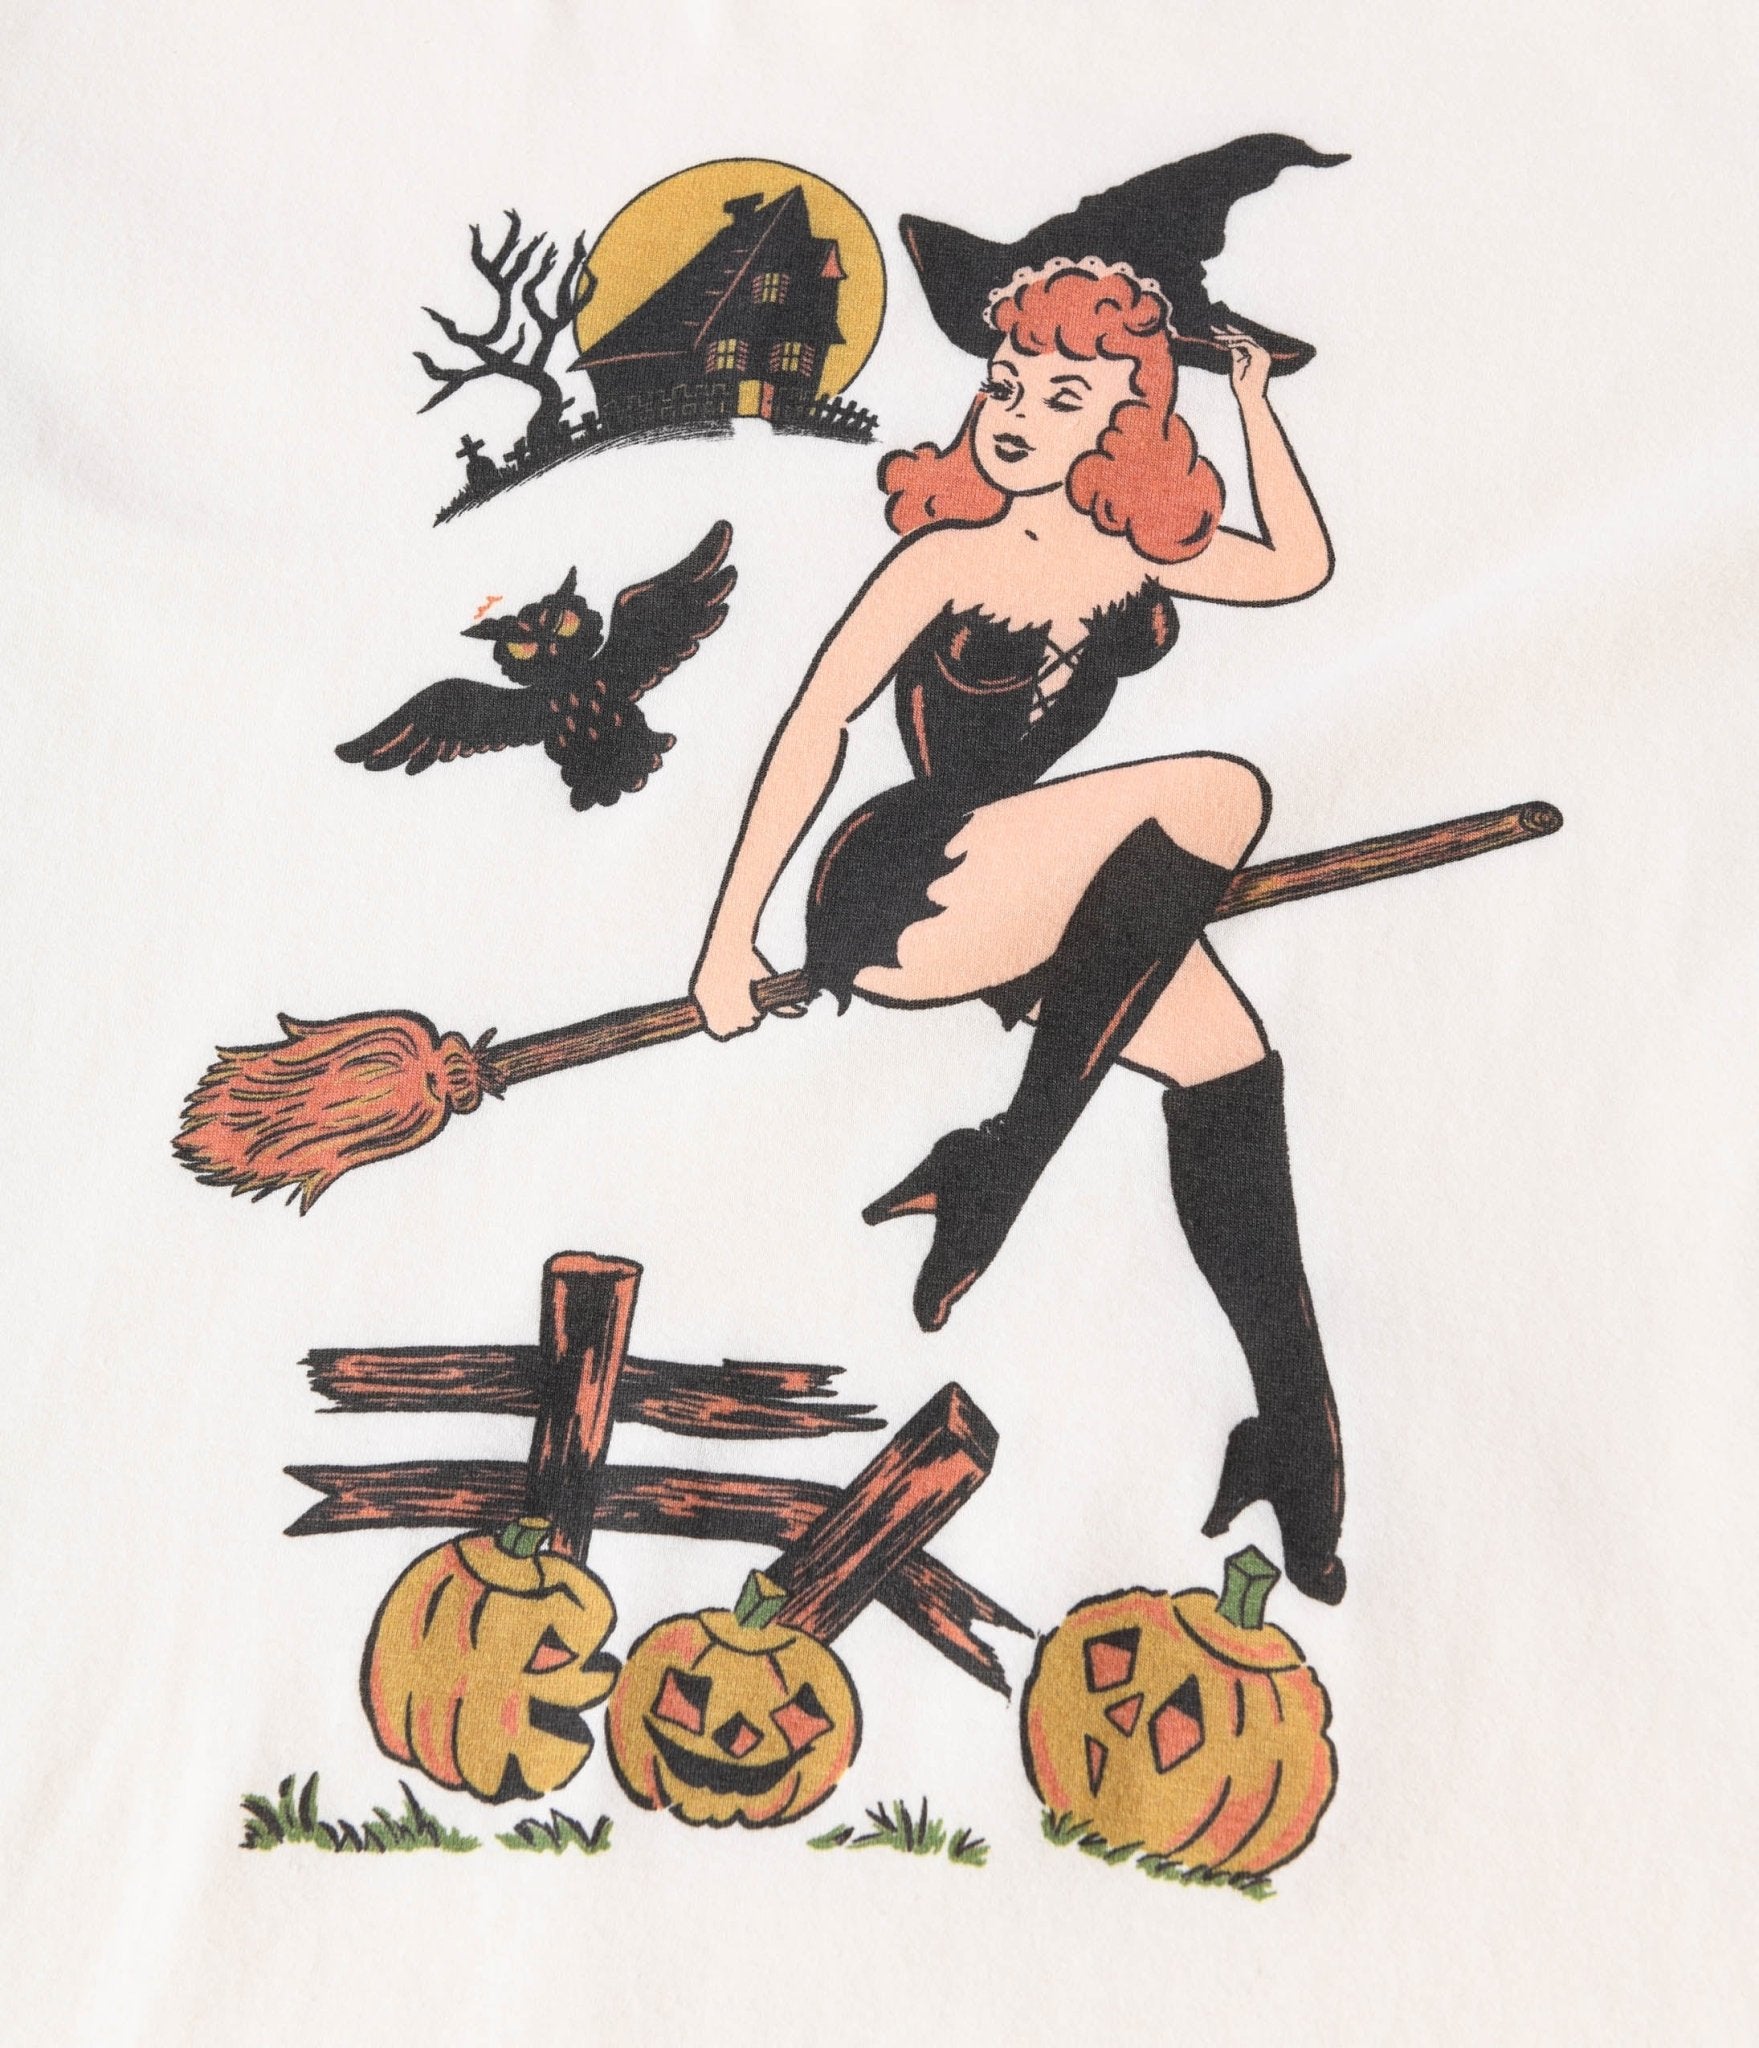 Trick or Treat Fitted T-shirt in Ivory Size S,M,L,XL,2XL,3XL, Halloween  Vintage Inspired by Mischief Made Witch Pinup Black Cat 